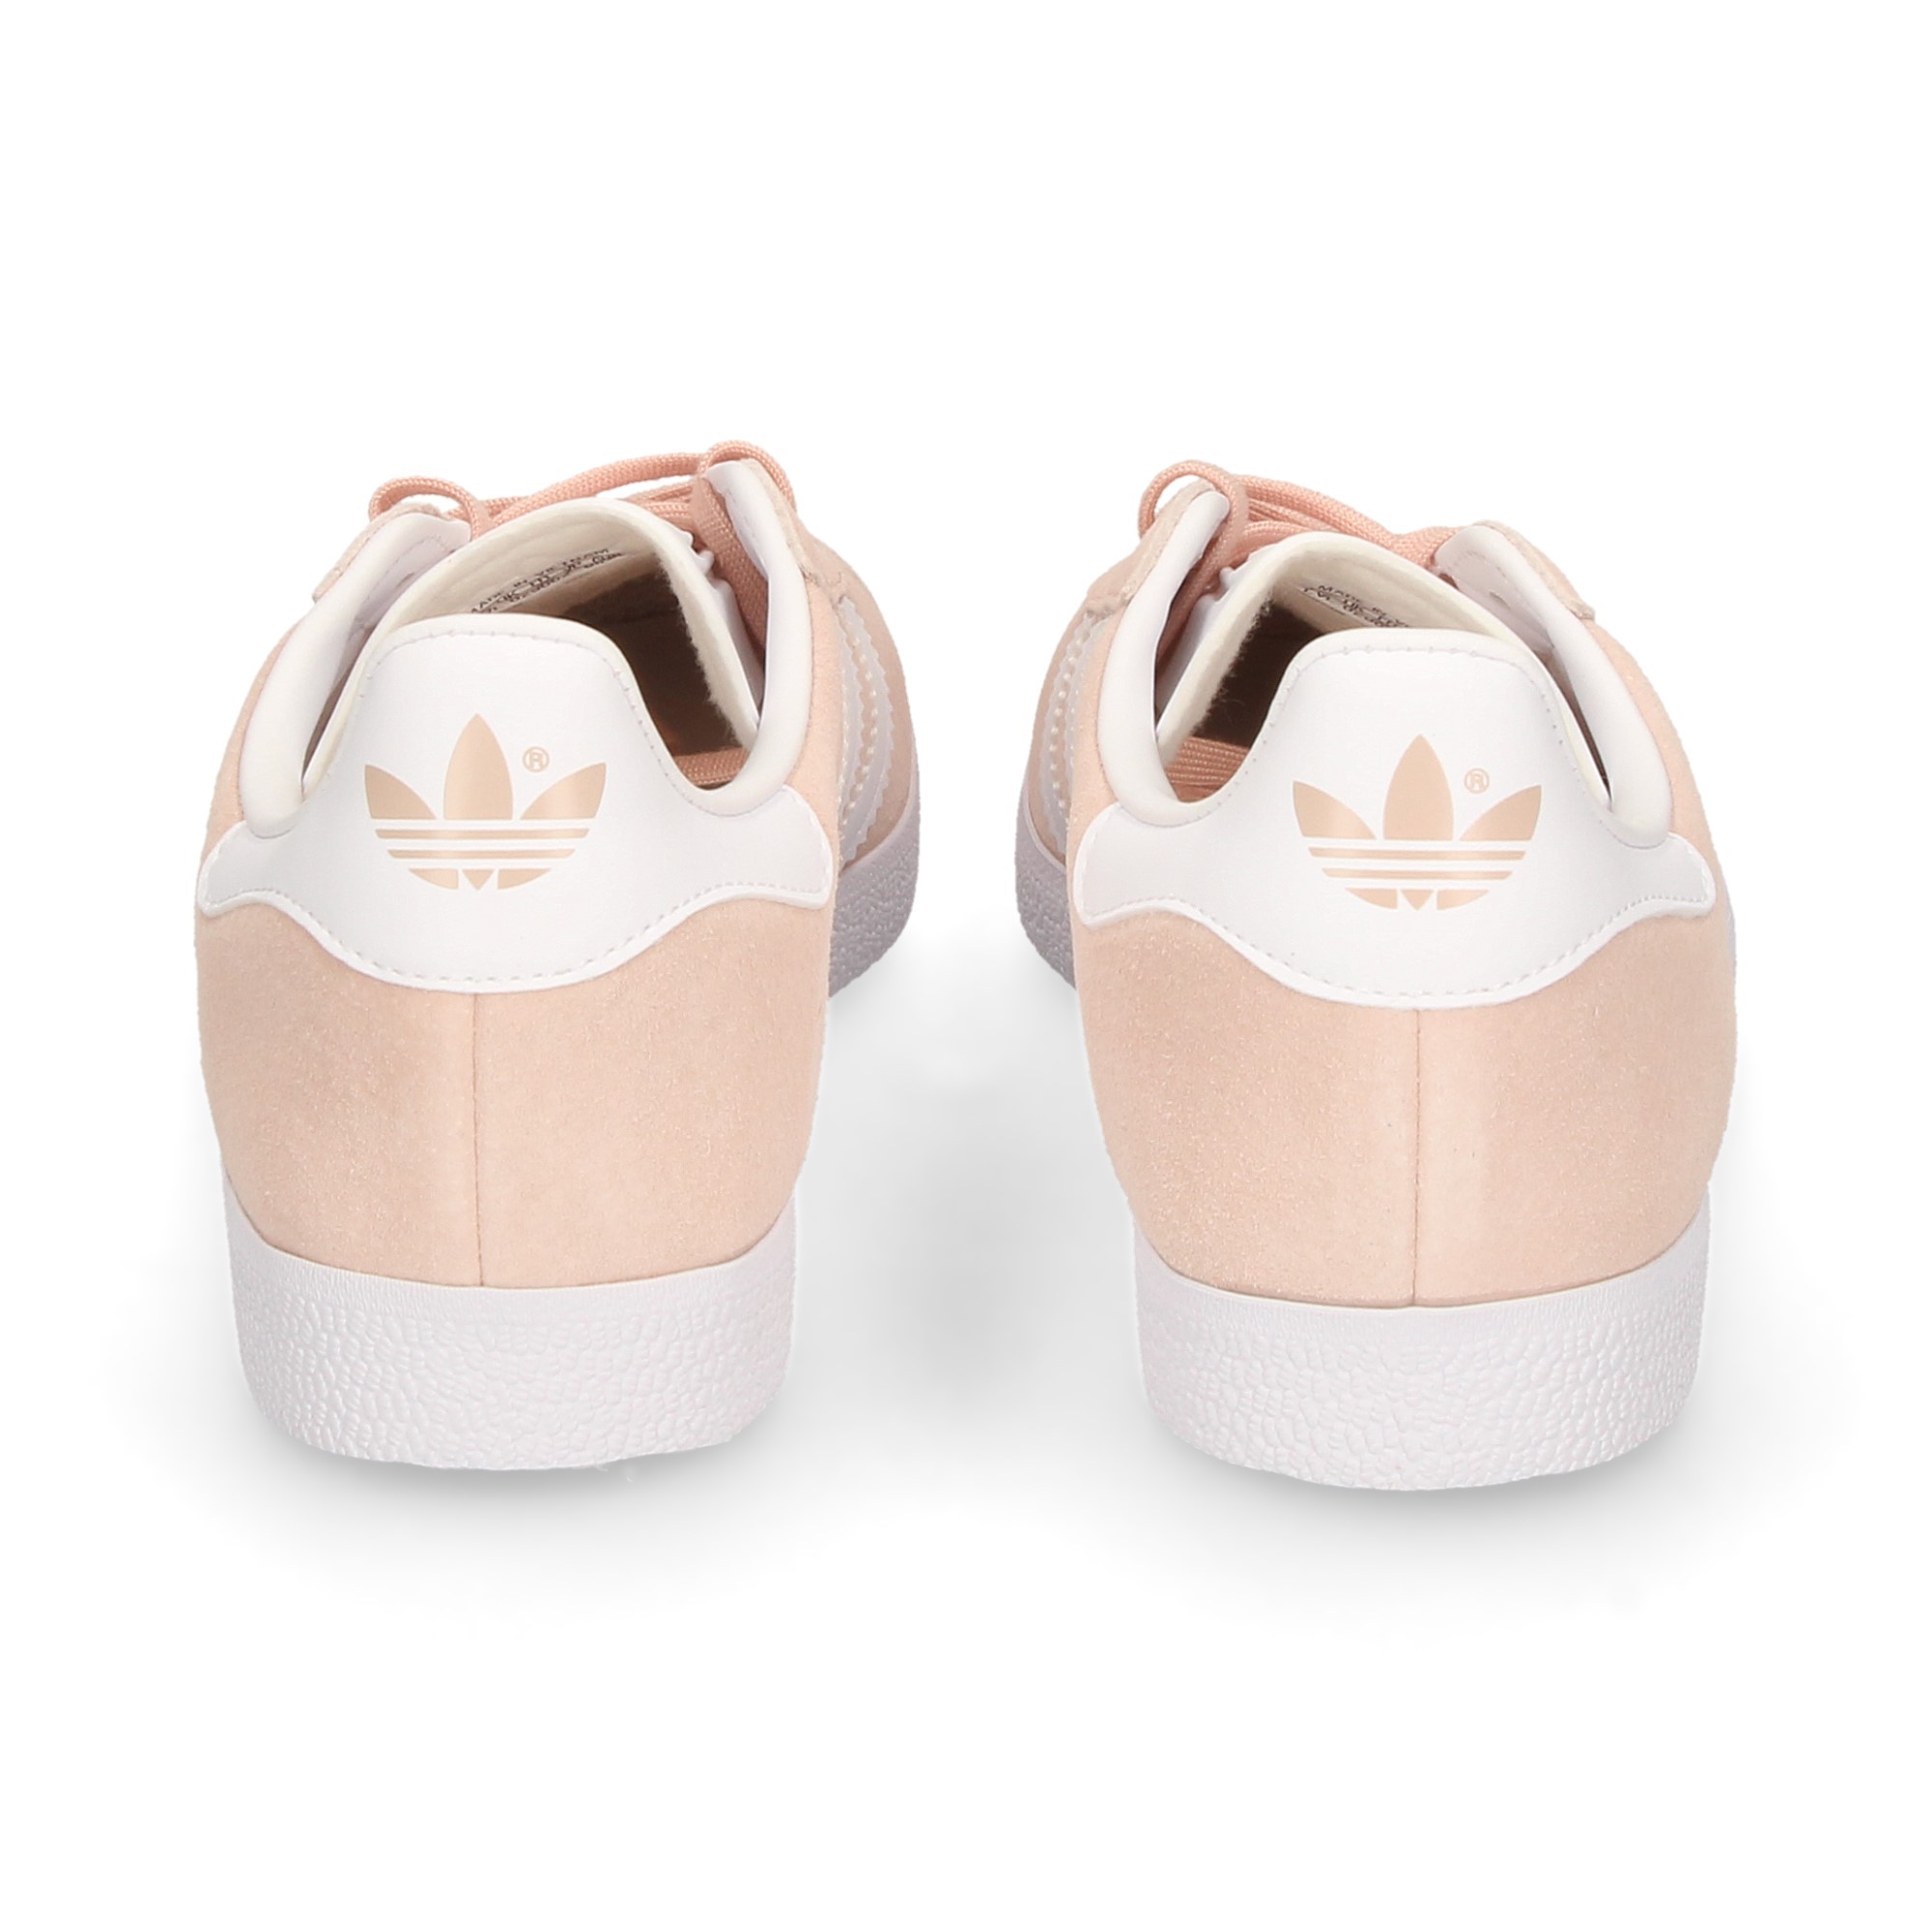 sport-3-rayures-blanc-suede-rose